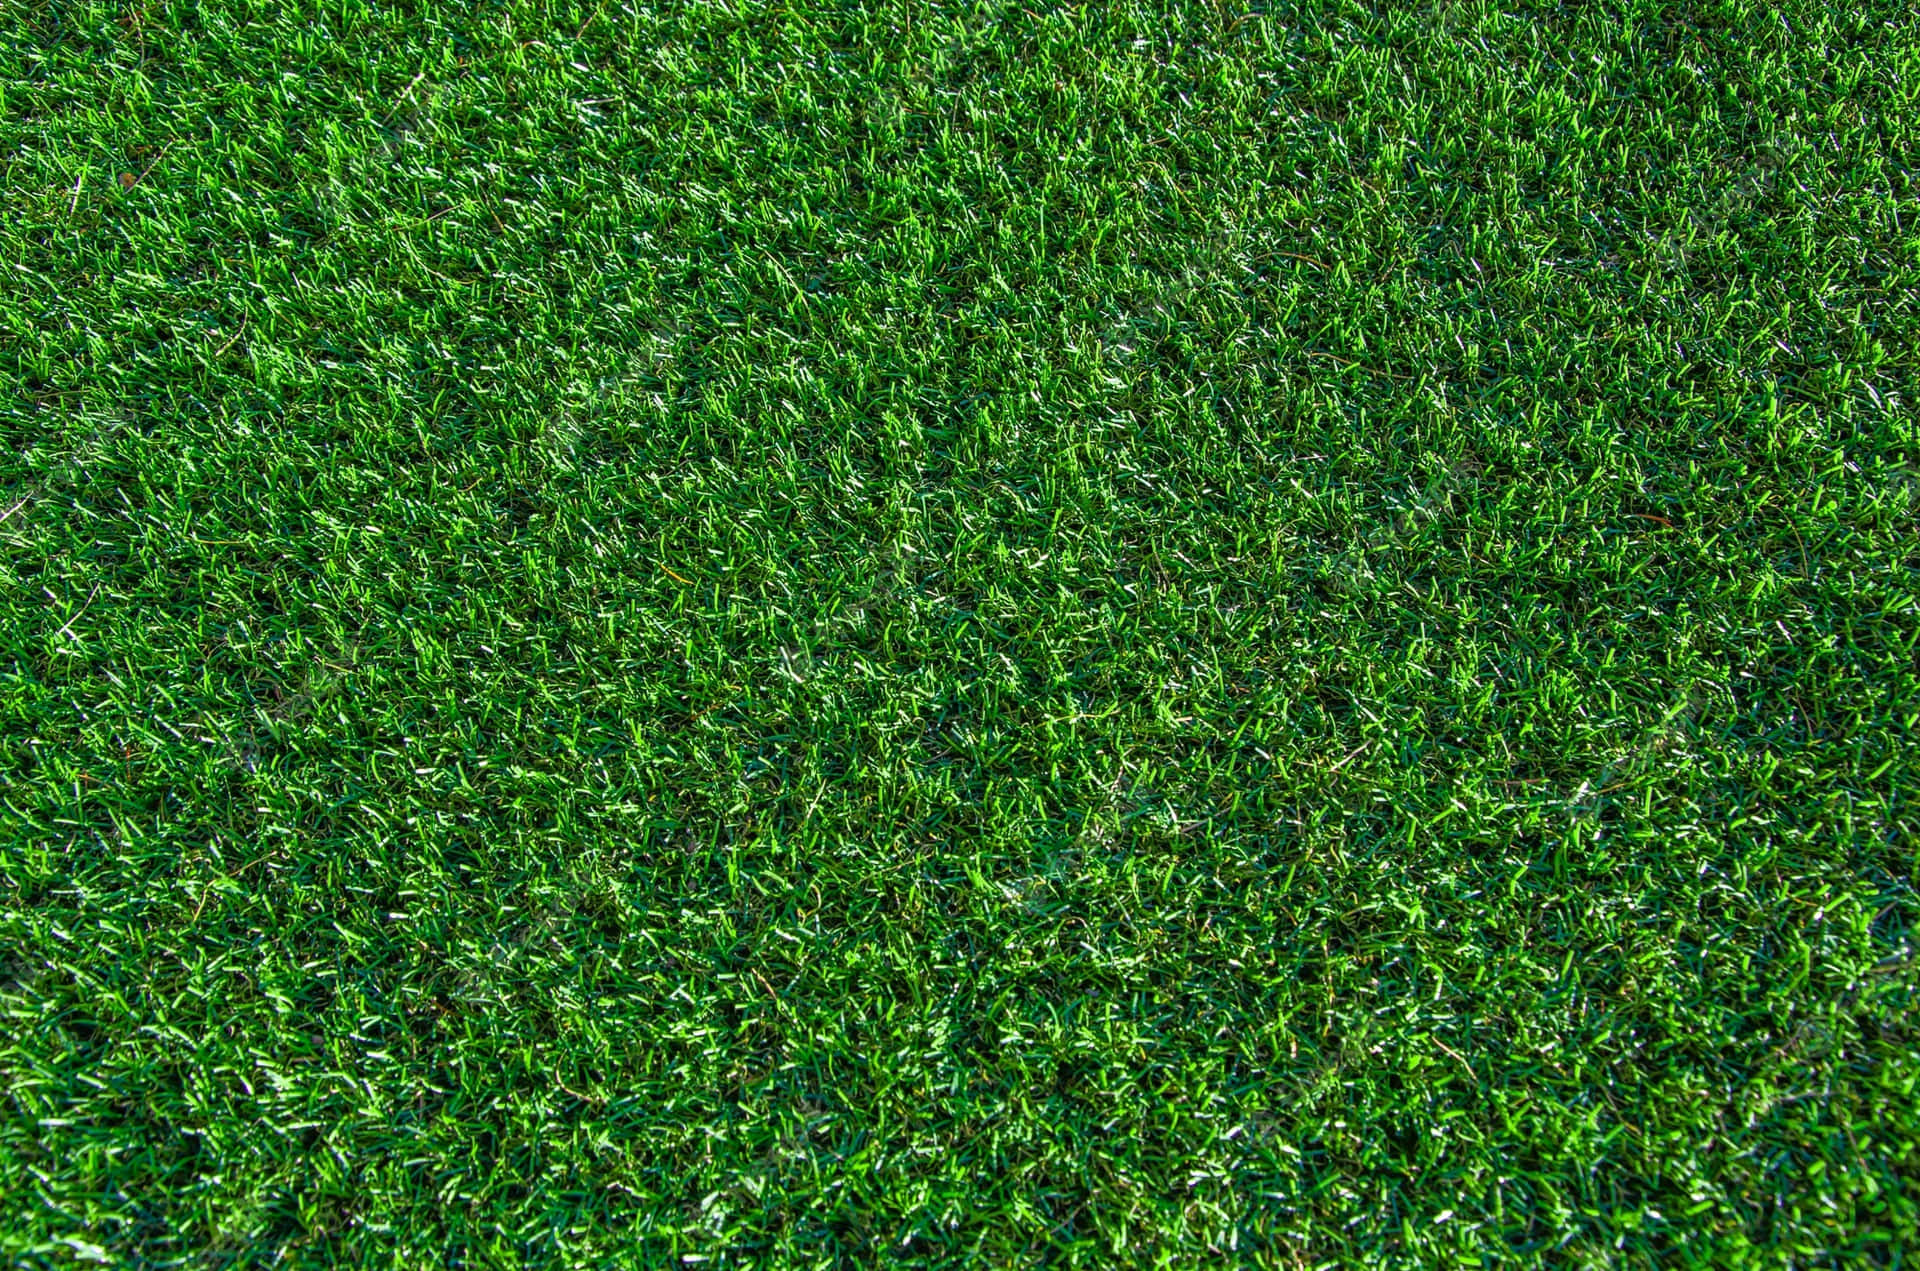 A lush and vibrant blanket of green grass, perfect for a picnic or a leisurely stroll.